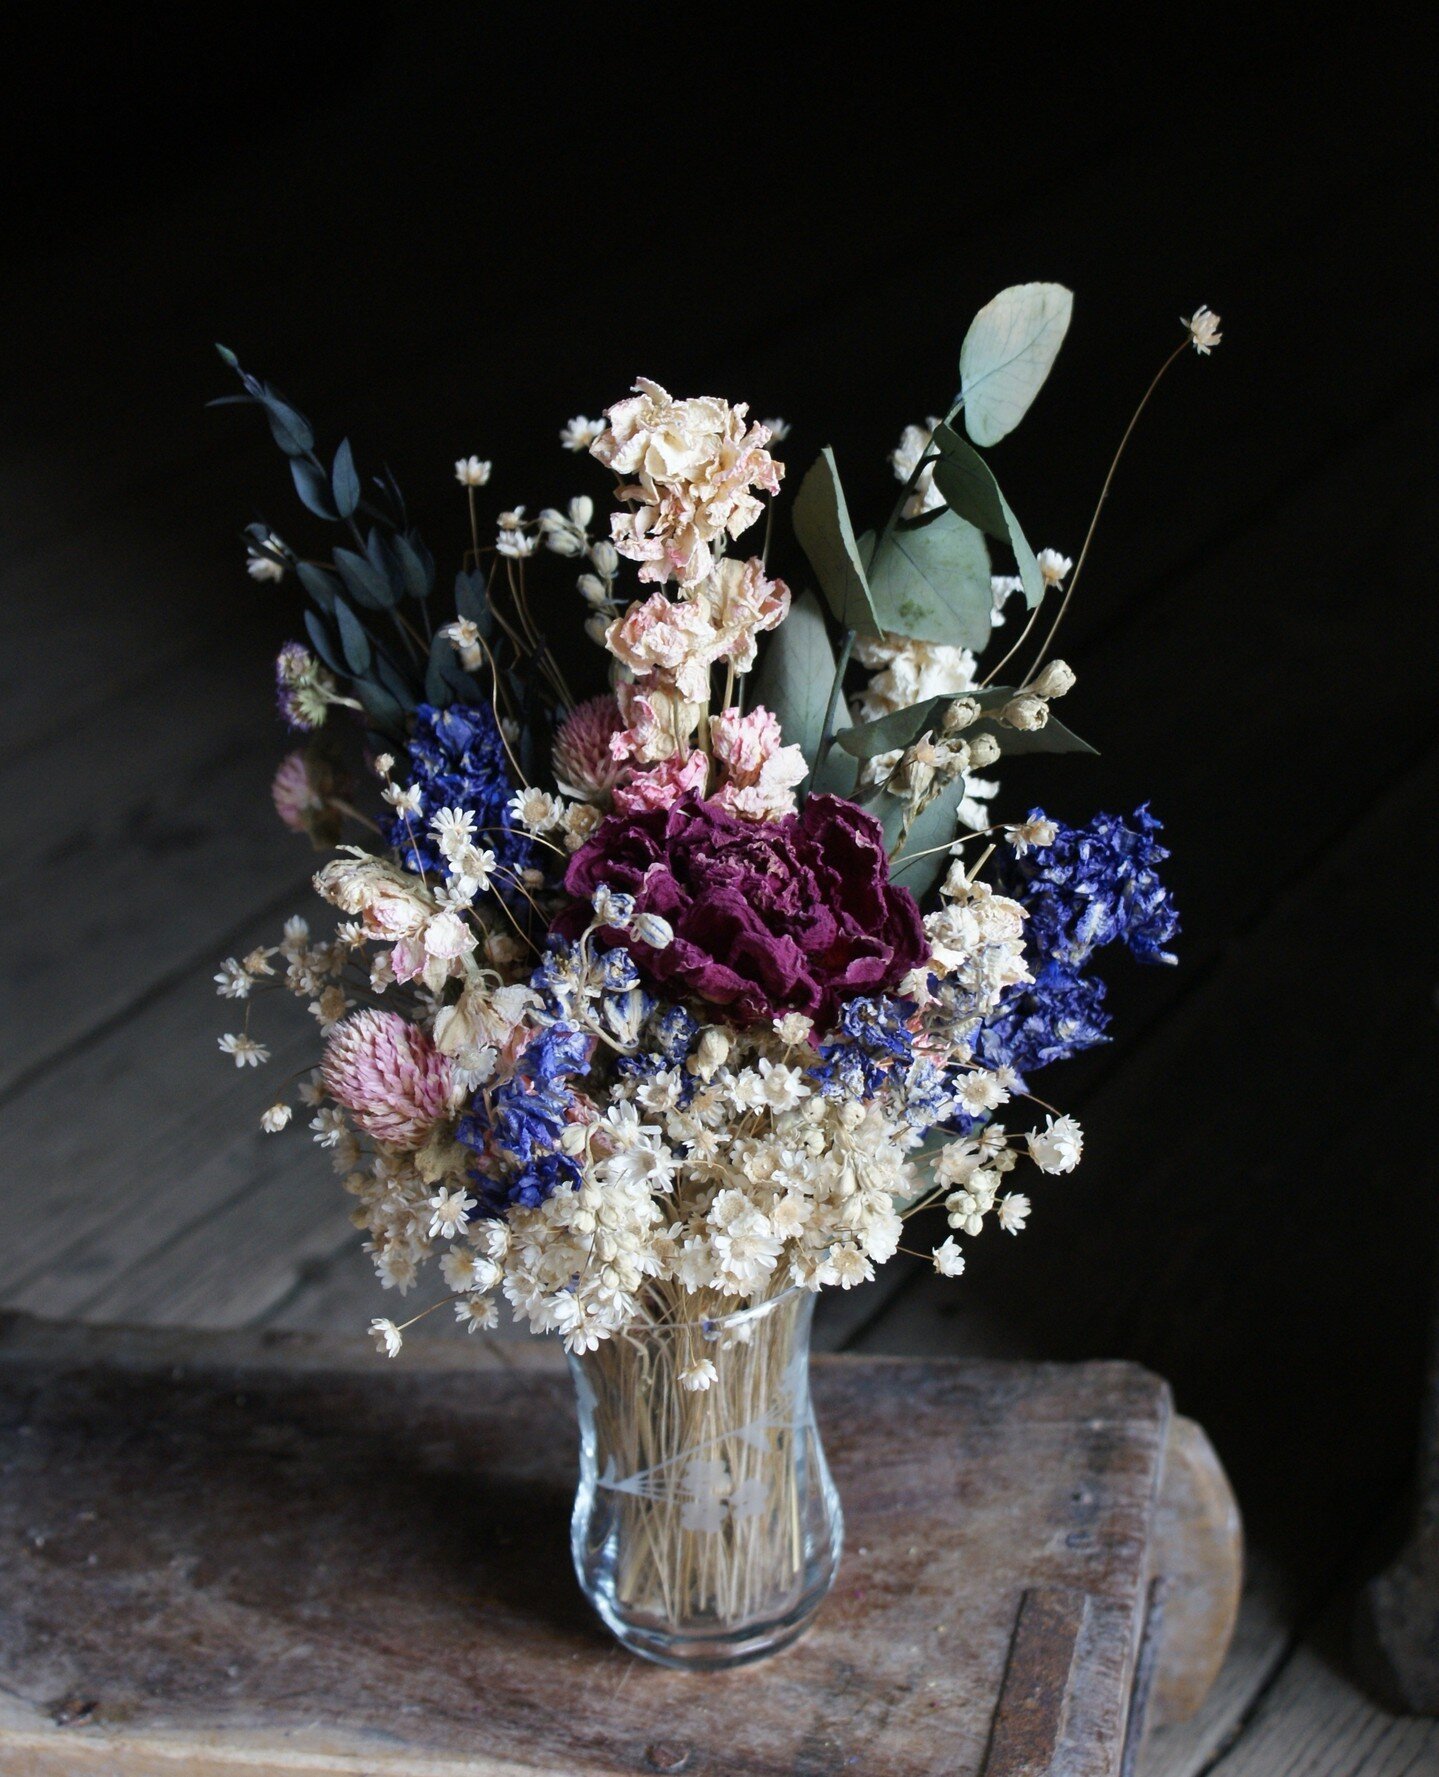 Floral inspiration for table scapes 🖤 These were used at a Spring wedding last year. I love the moodier tones, a different twist on the usual pastel tones used in Spring. These were paired with vintage mini vases, which are just soo pretty with the 